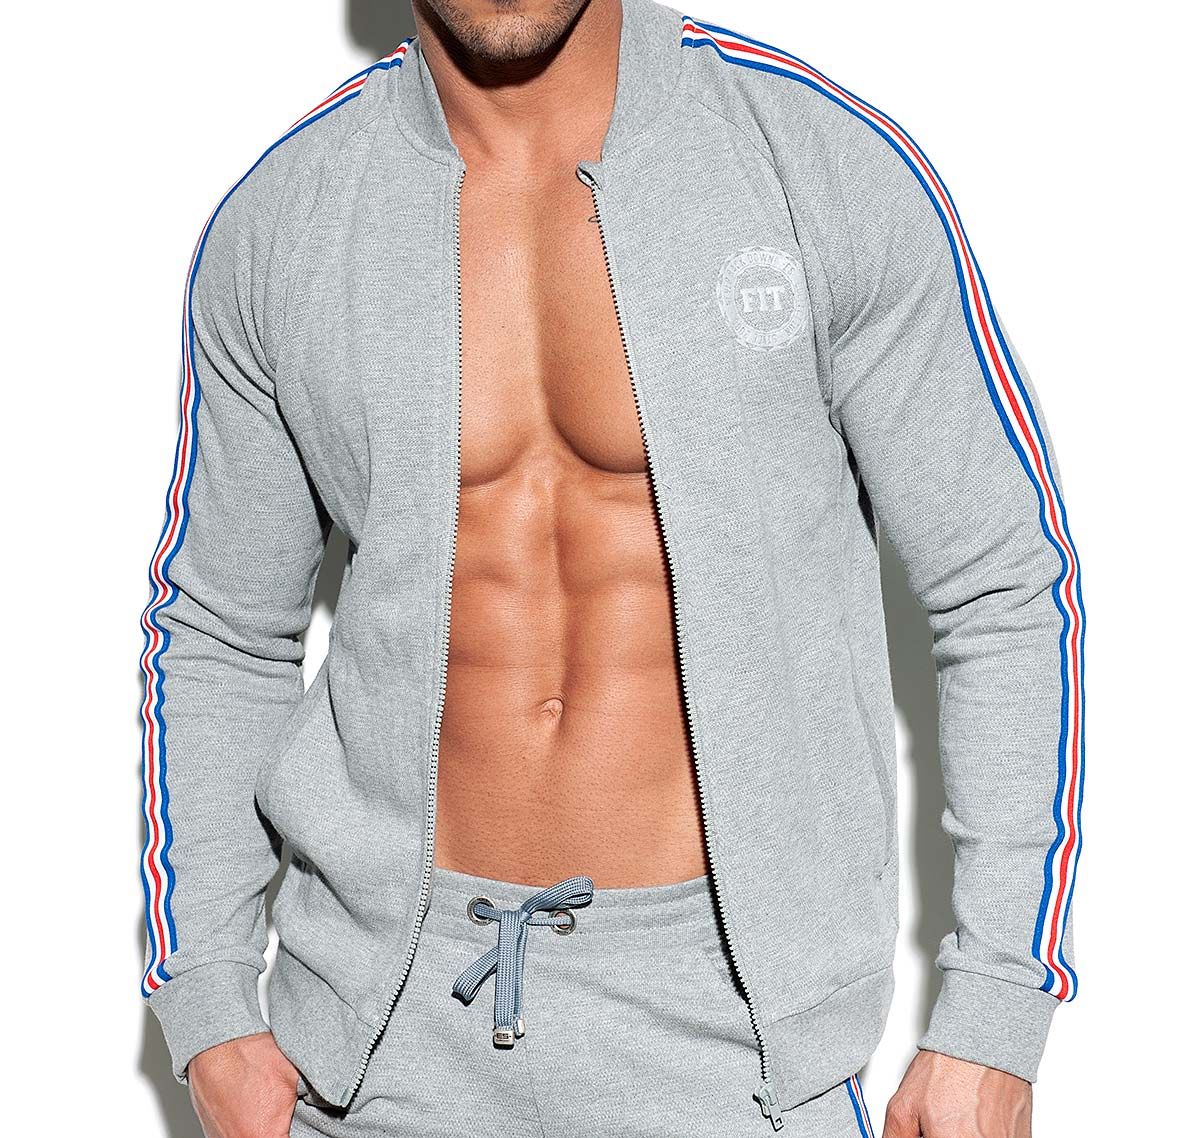 ES Collection Giacca sportiva FIT TAPE JACKET SP208, grigio